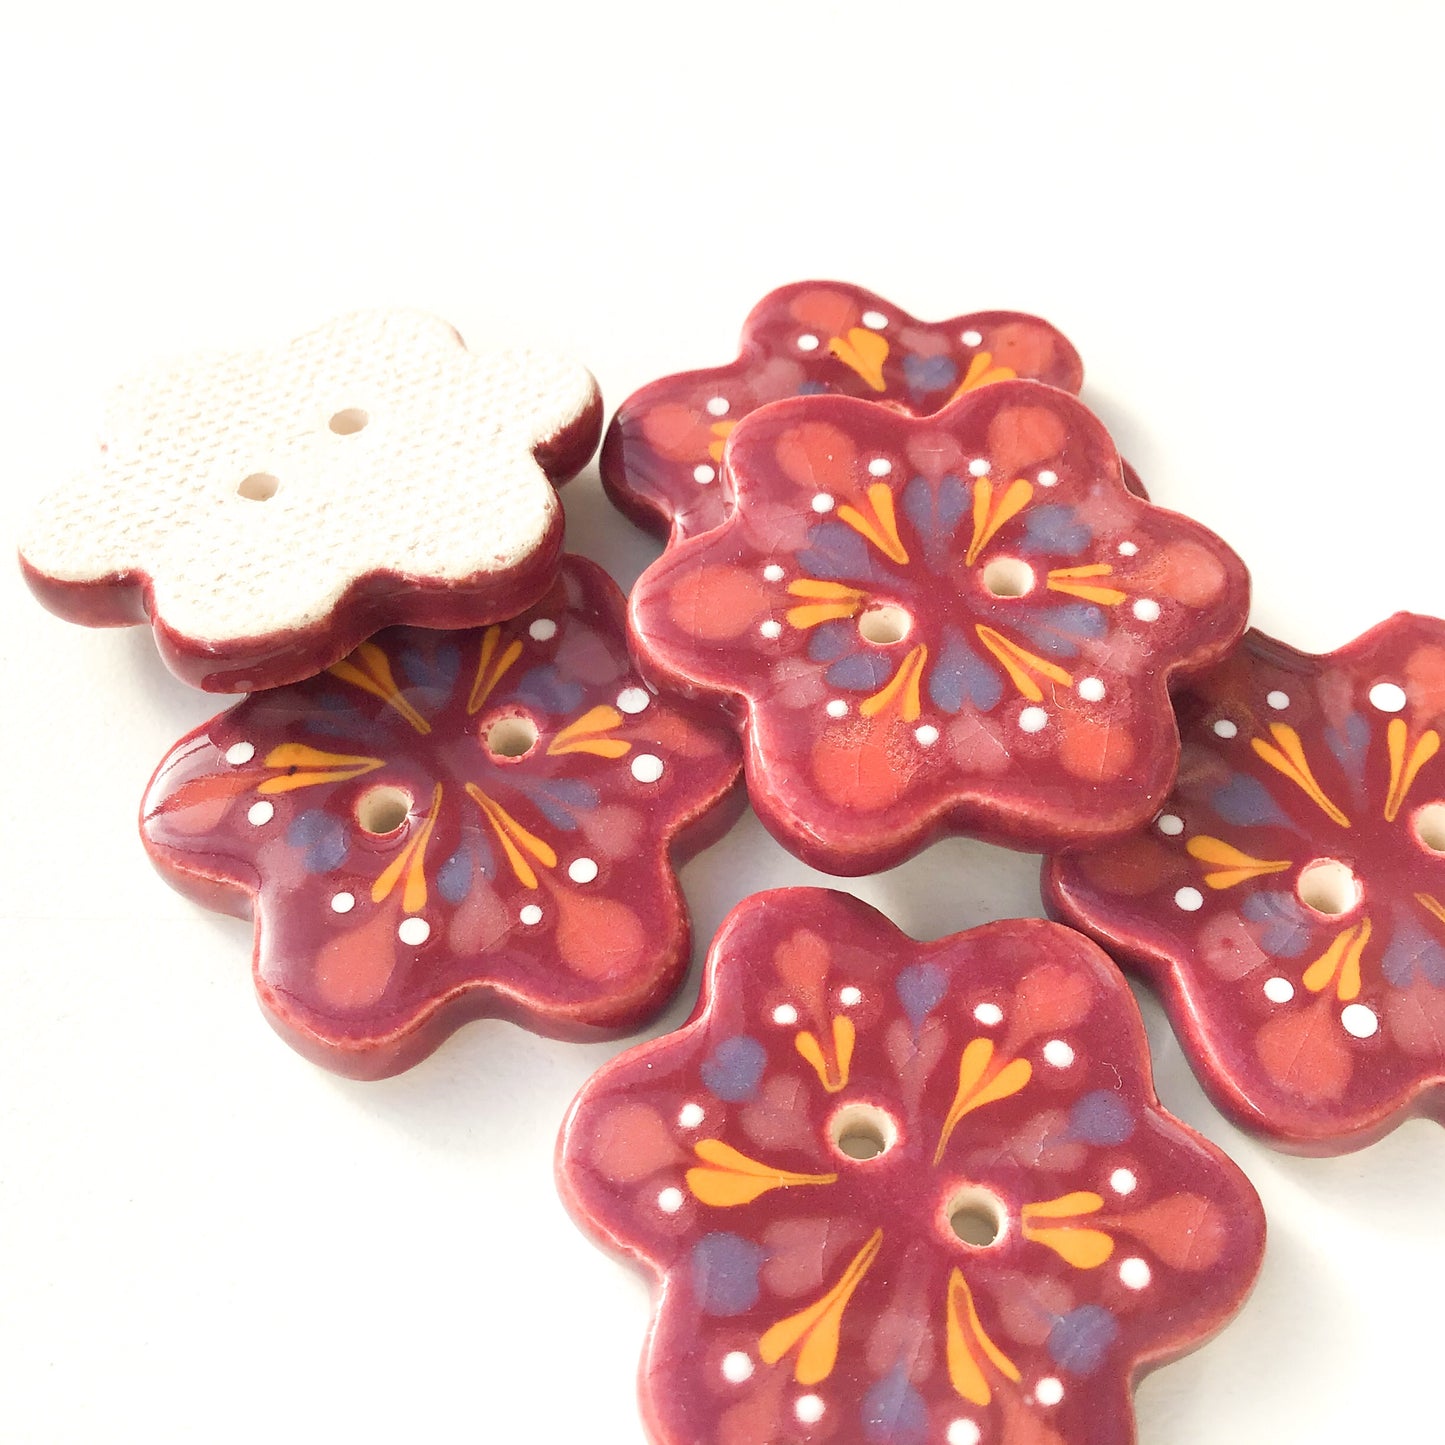 Wine Colored - Flower Shaped Ceramic Buttons - Decorative Clay Buttons - 1 1/4"